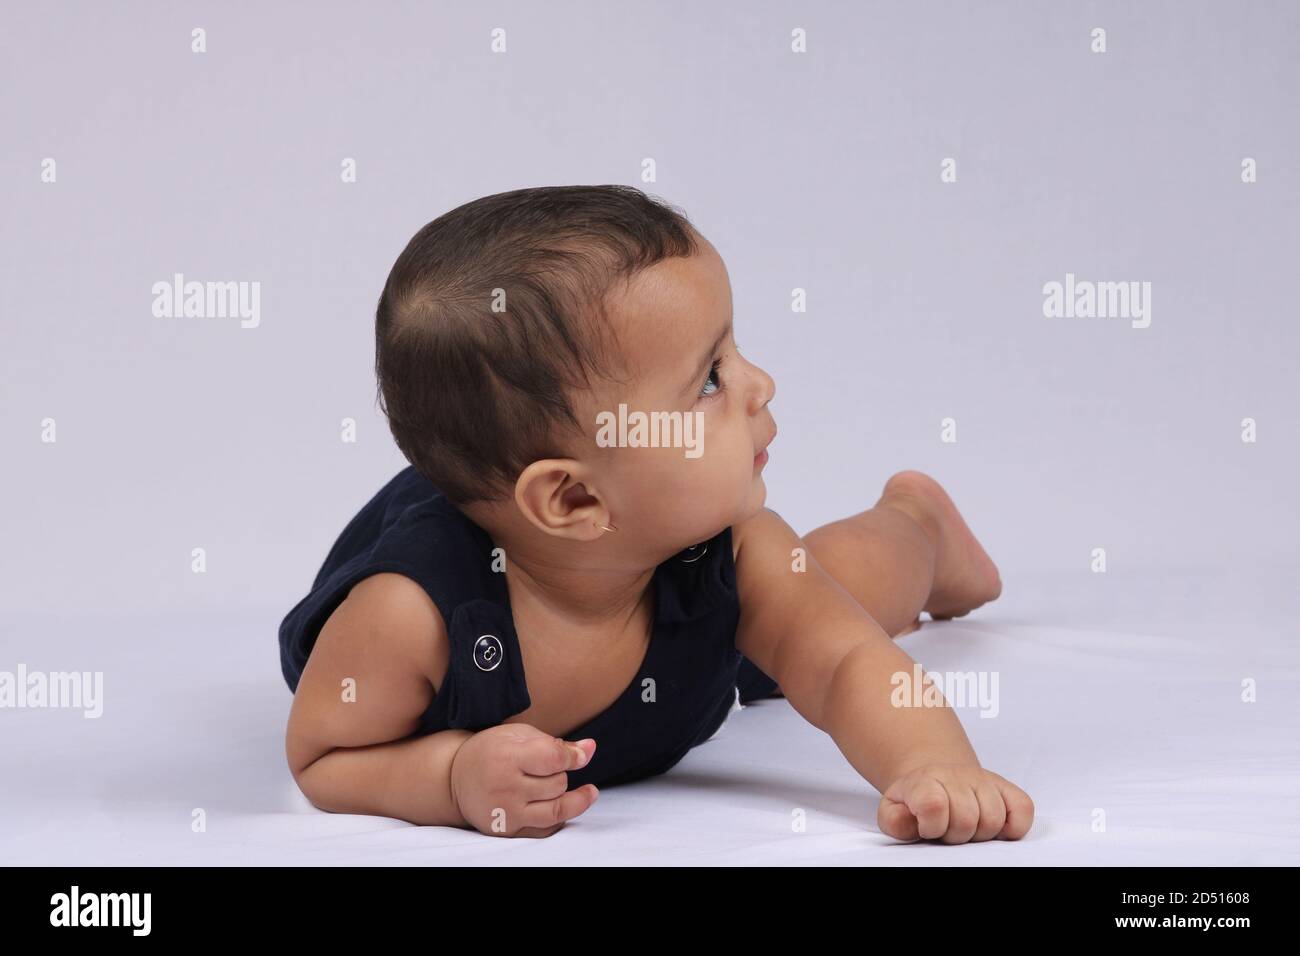 Happy Indian baby lying over white background. Stock Photo